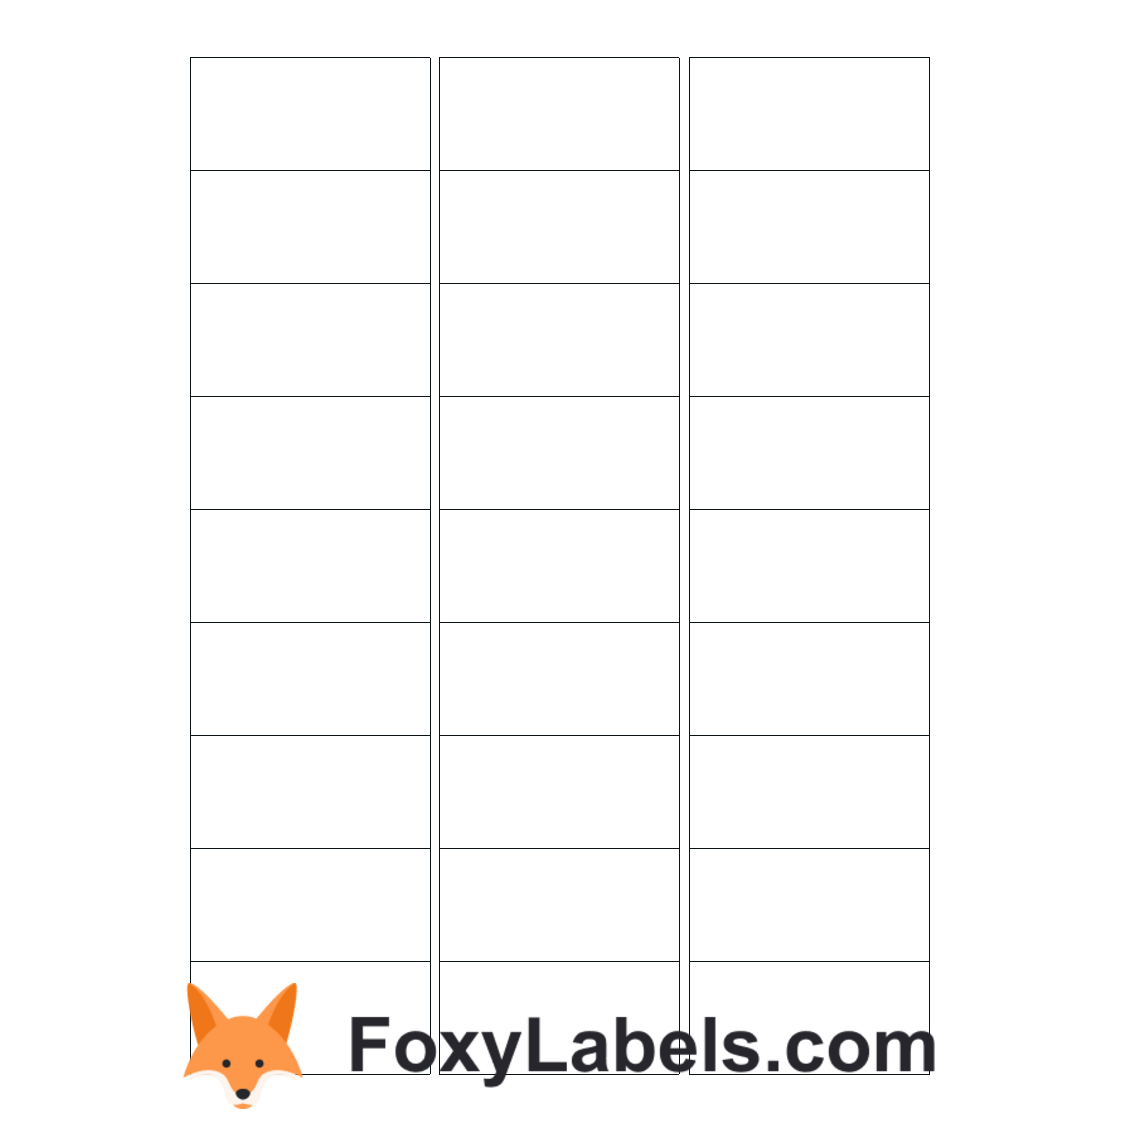 Avery L4737 label template for Google Docs